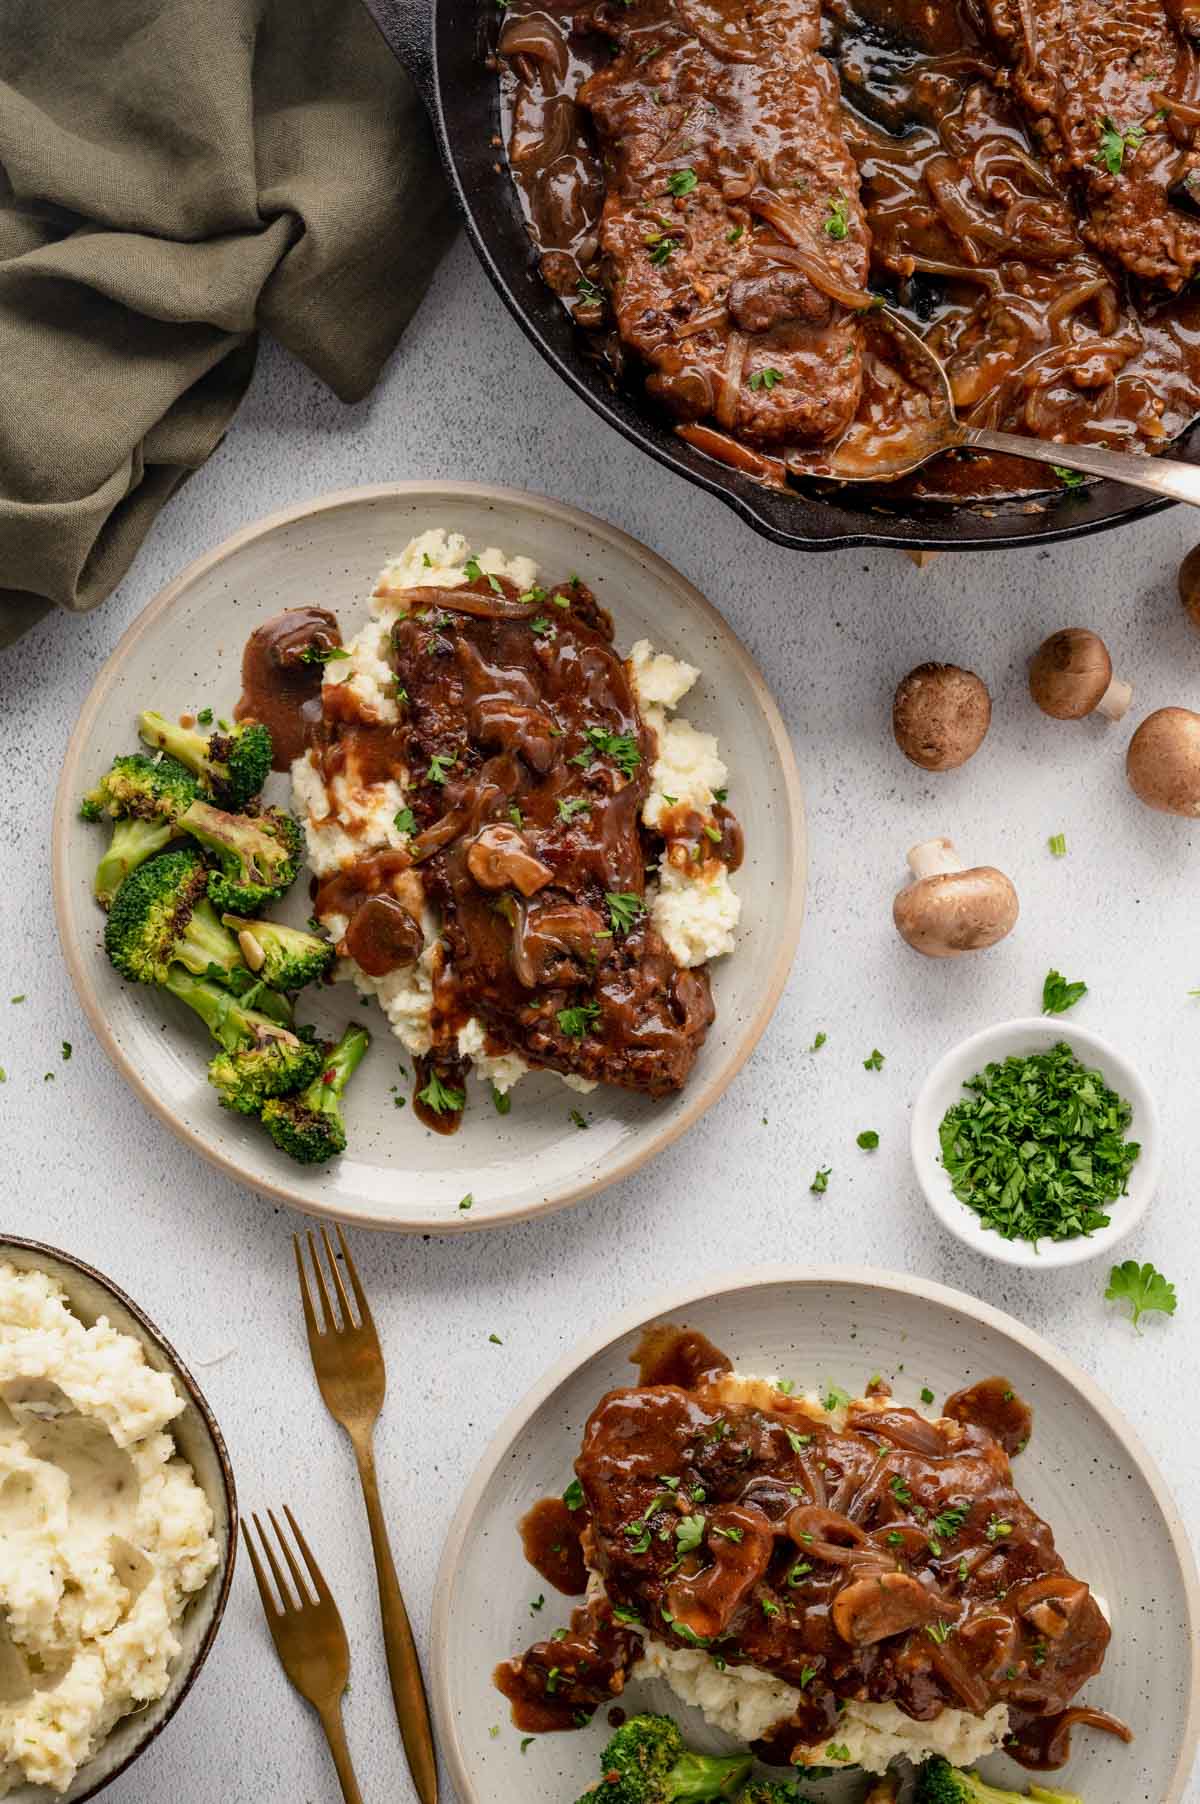 Cube steaks and gravy with mashed potatoes and broccoli on white plates.